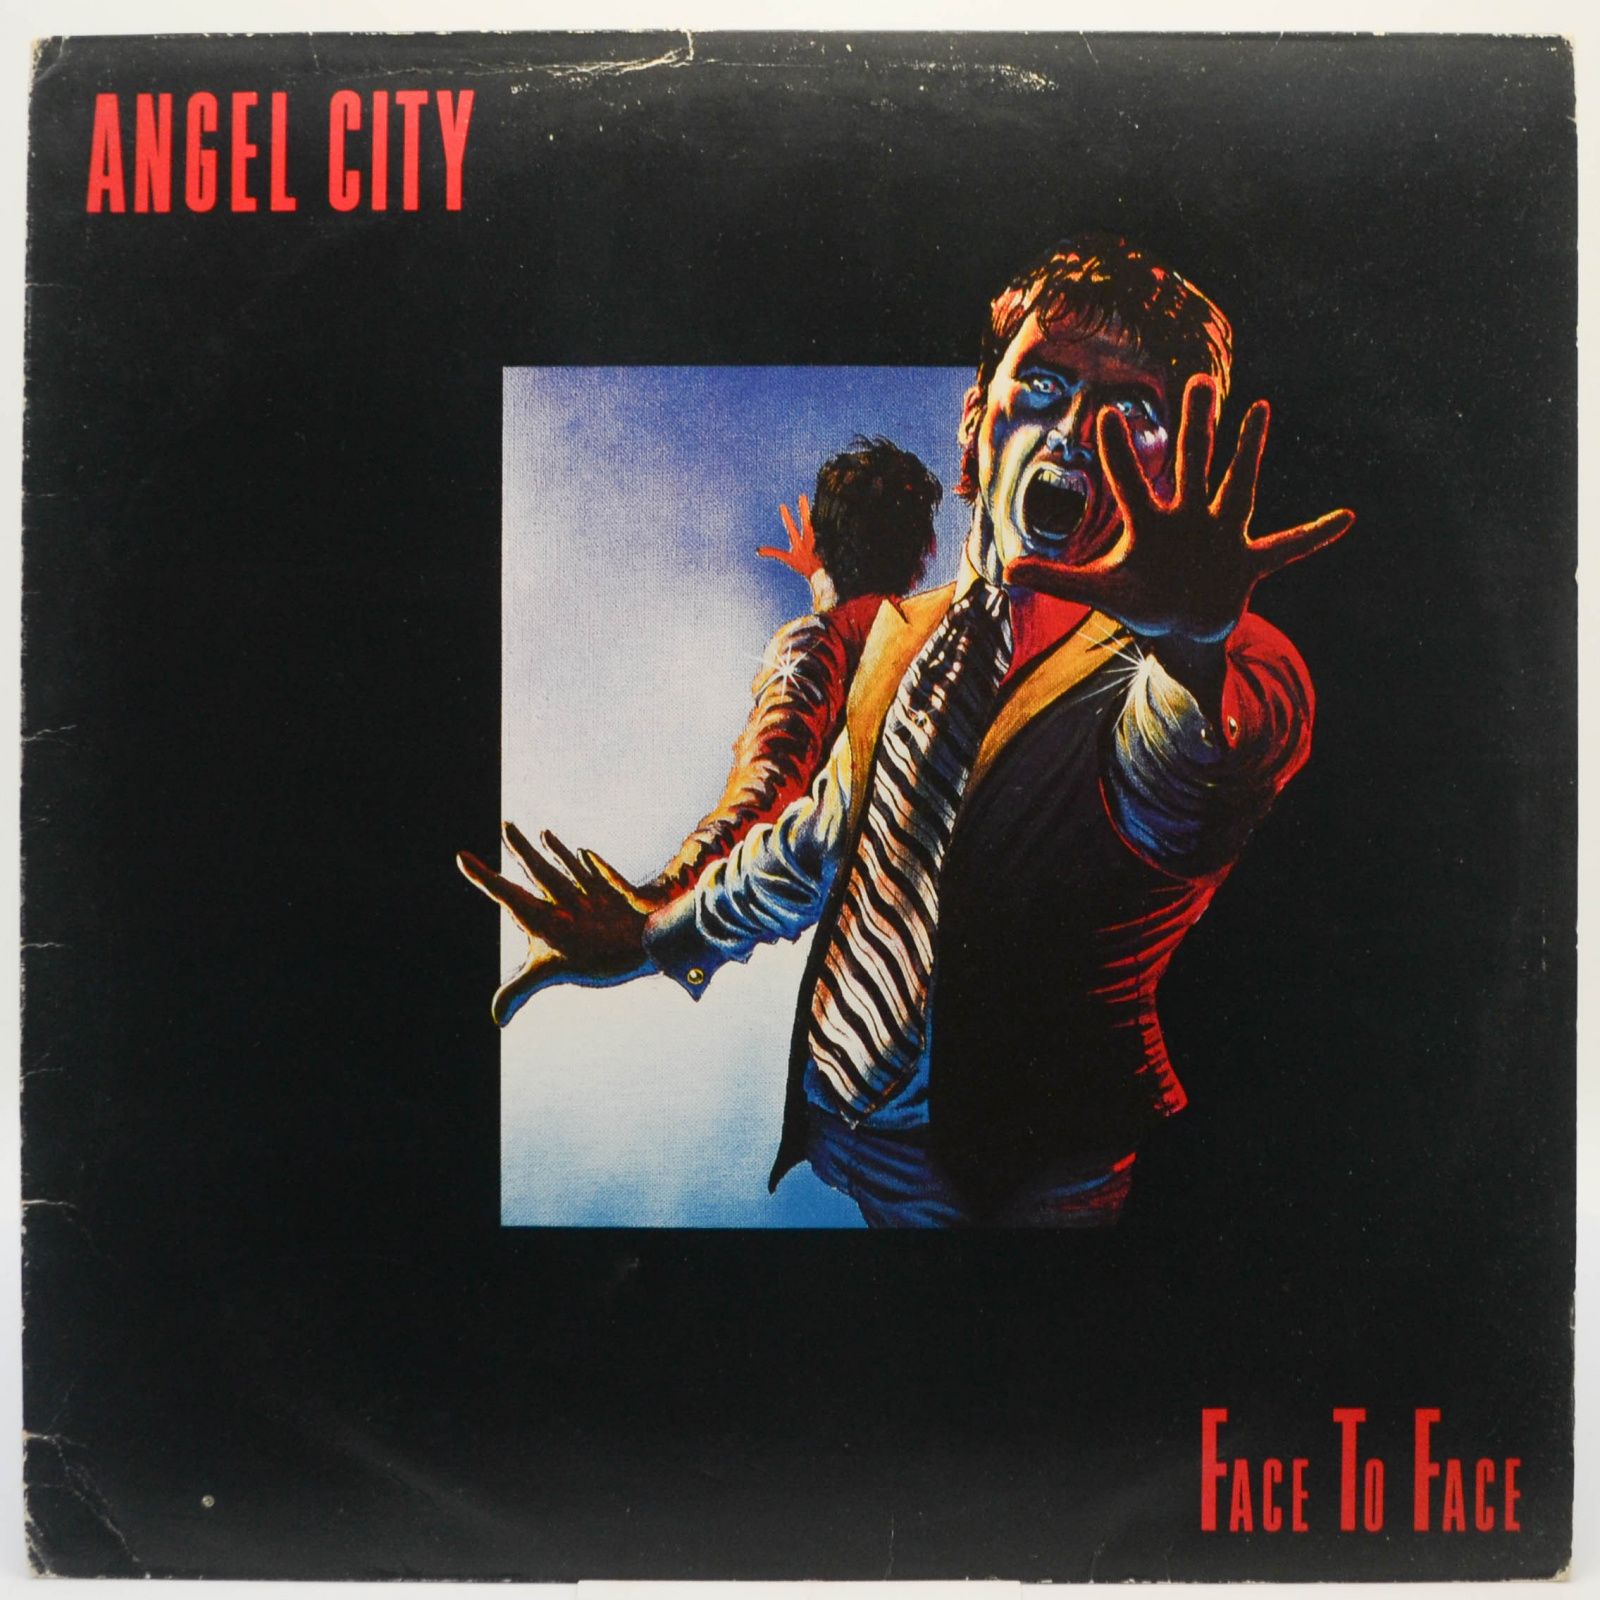 Angel City — Face To Face, 1980